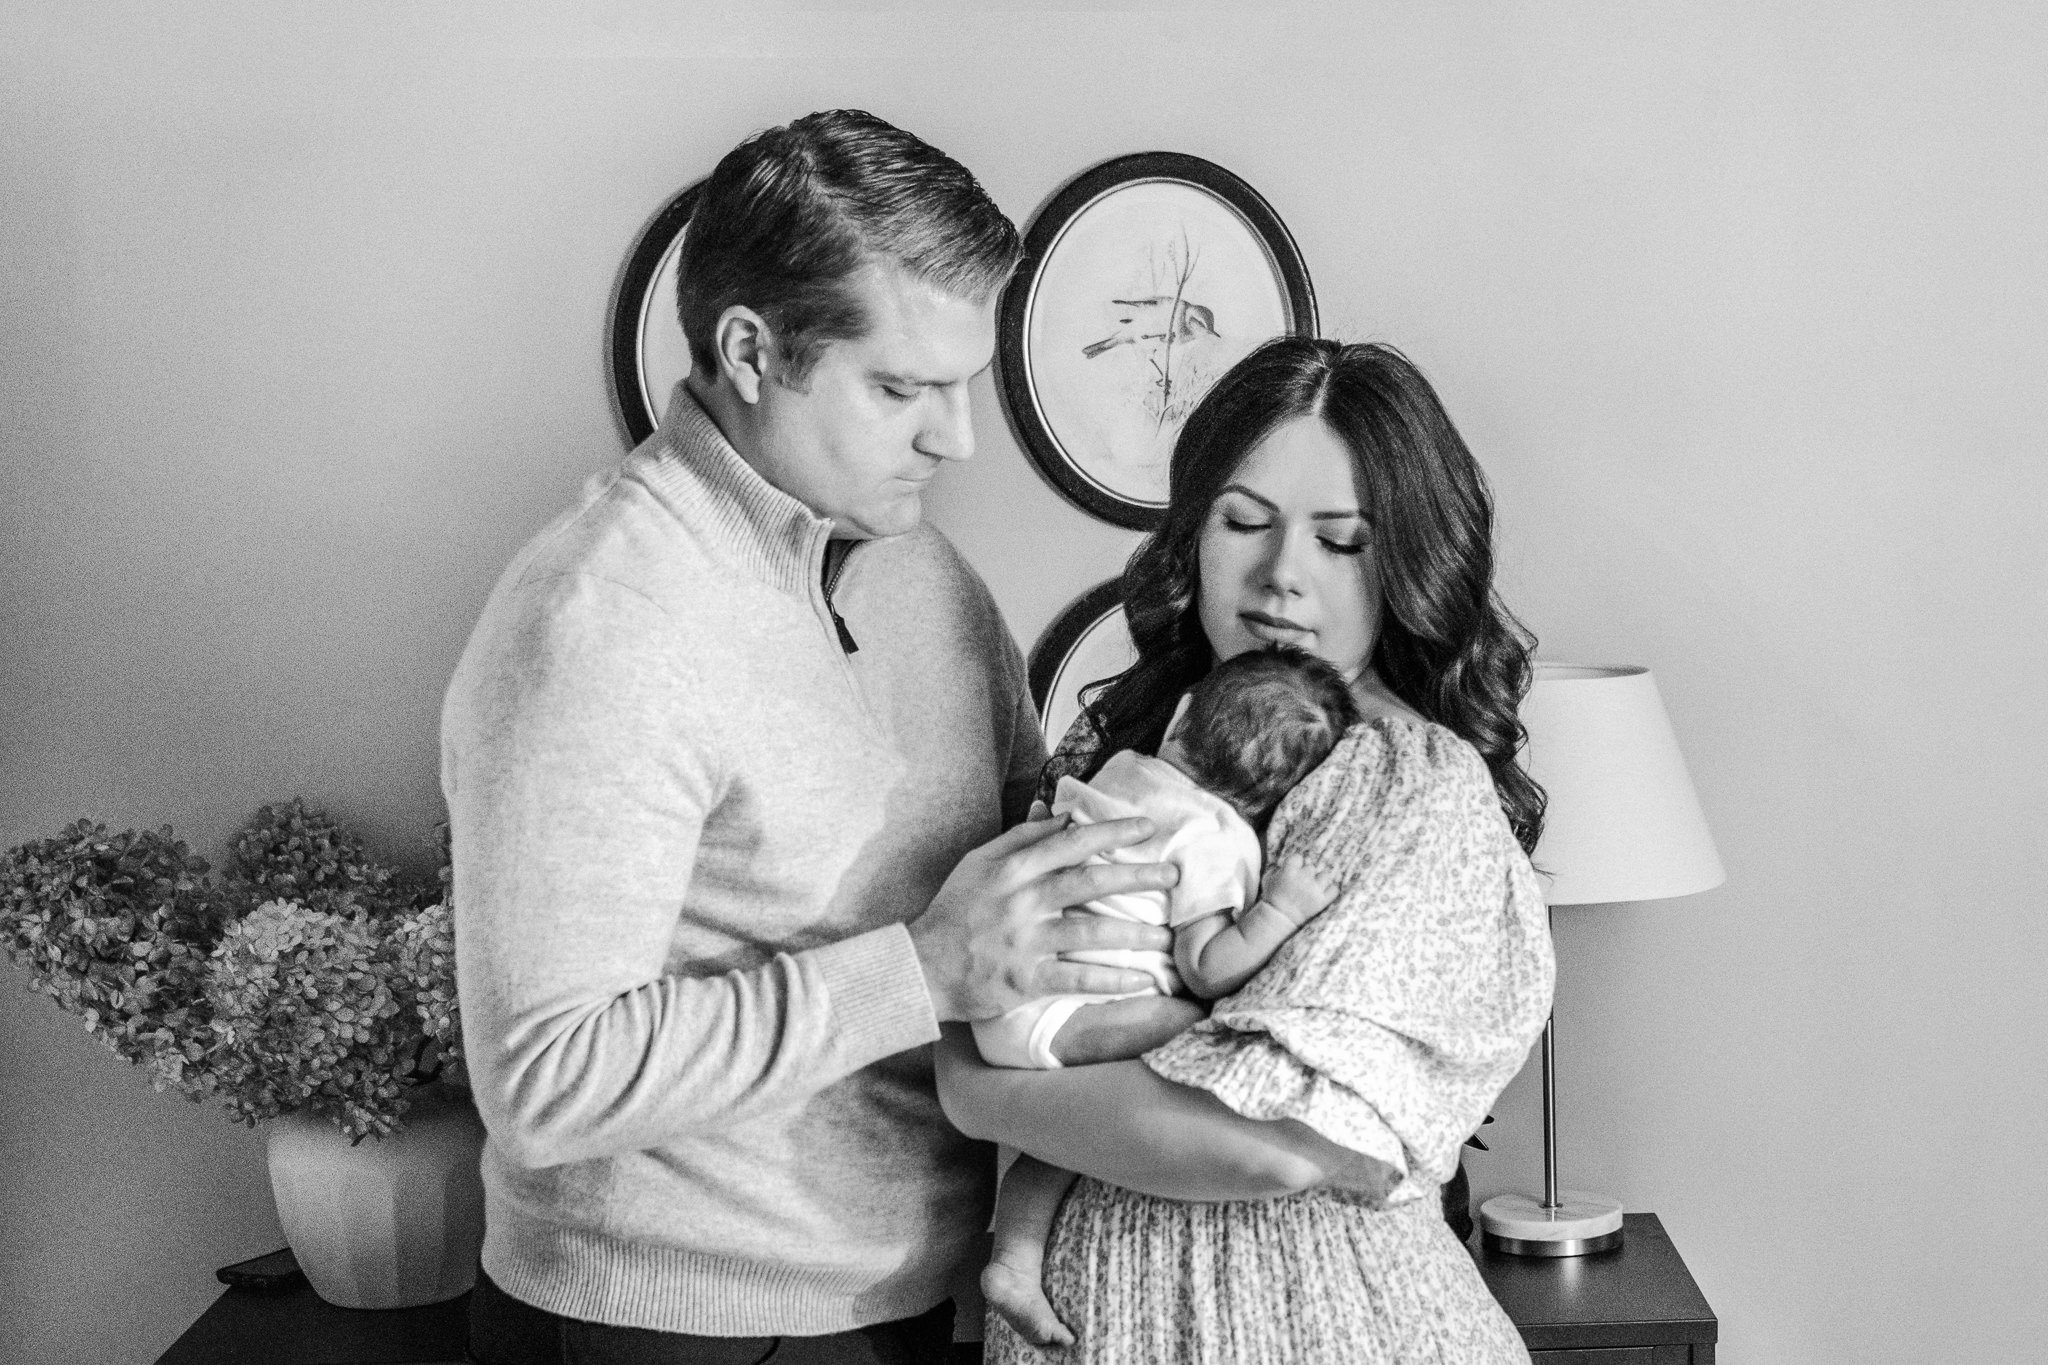  Nicole Hawkins Photography captures a black and white portrait of a mother holding her baby girl. Montclair newborn portraits #NicoleHawkinsPhotography #NicoleHawkinsNewborns #MontclairNewbornPhotographer #InHomeNewborns #NJNewborns #Babygirl #Newbo